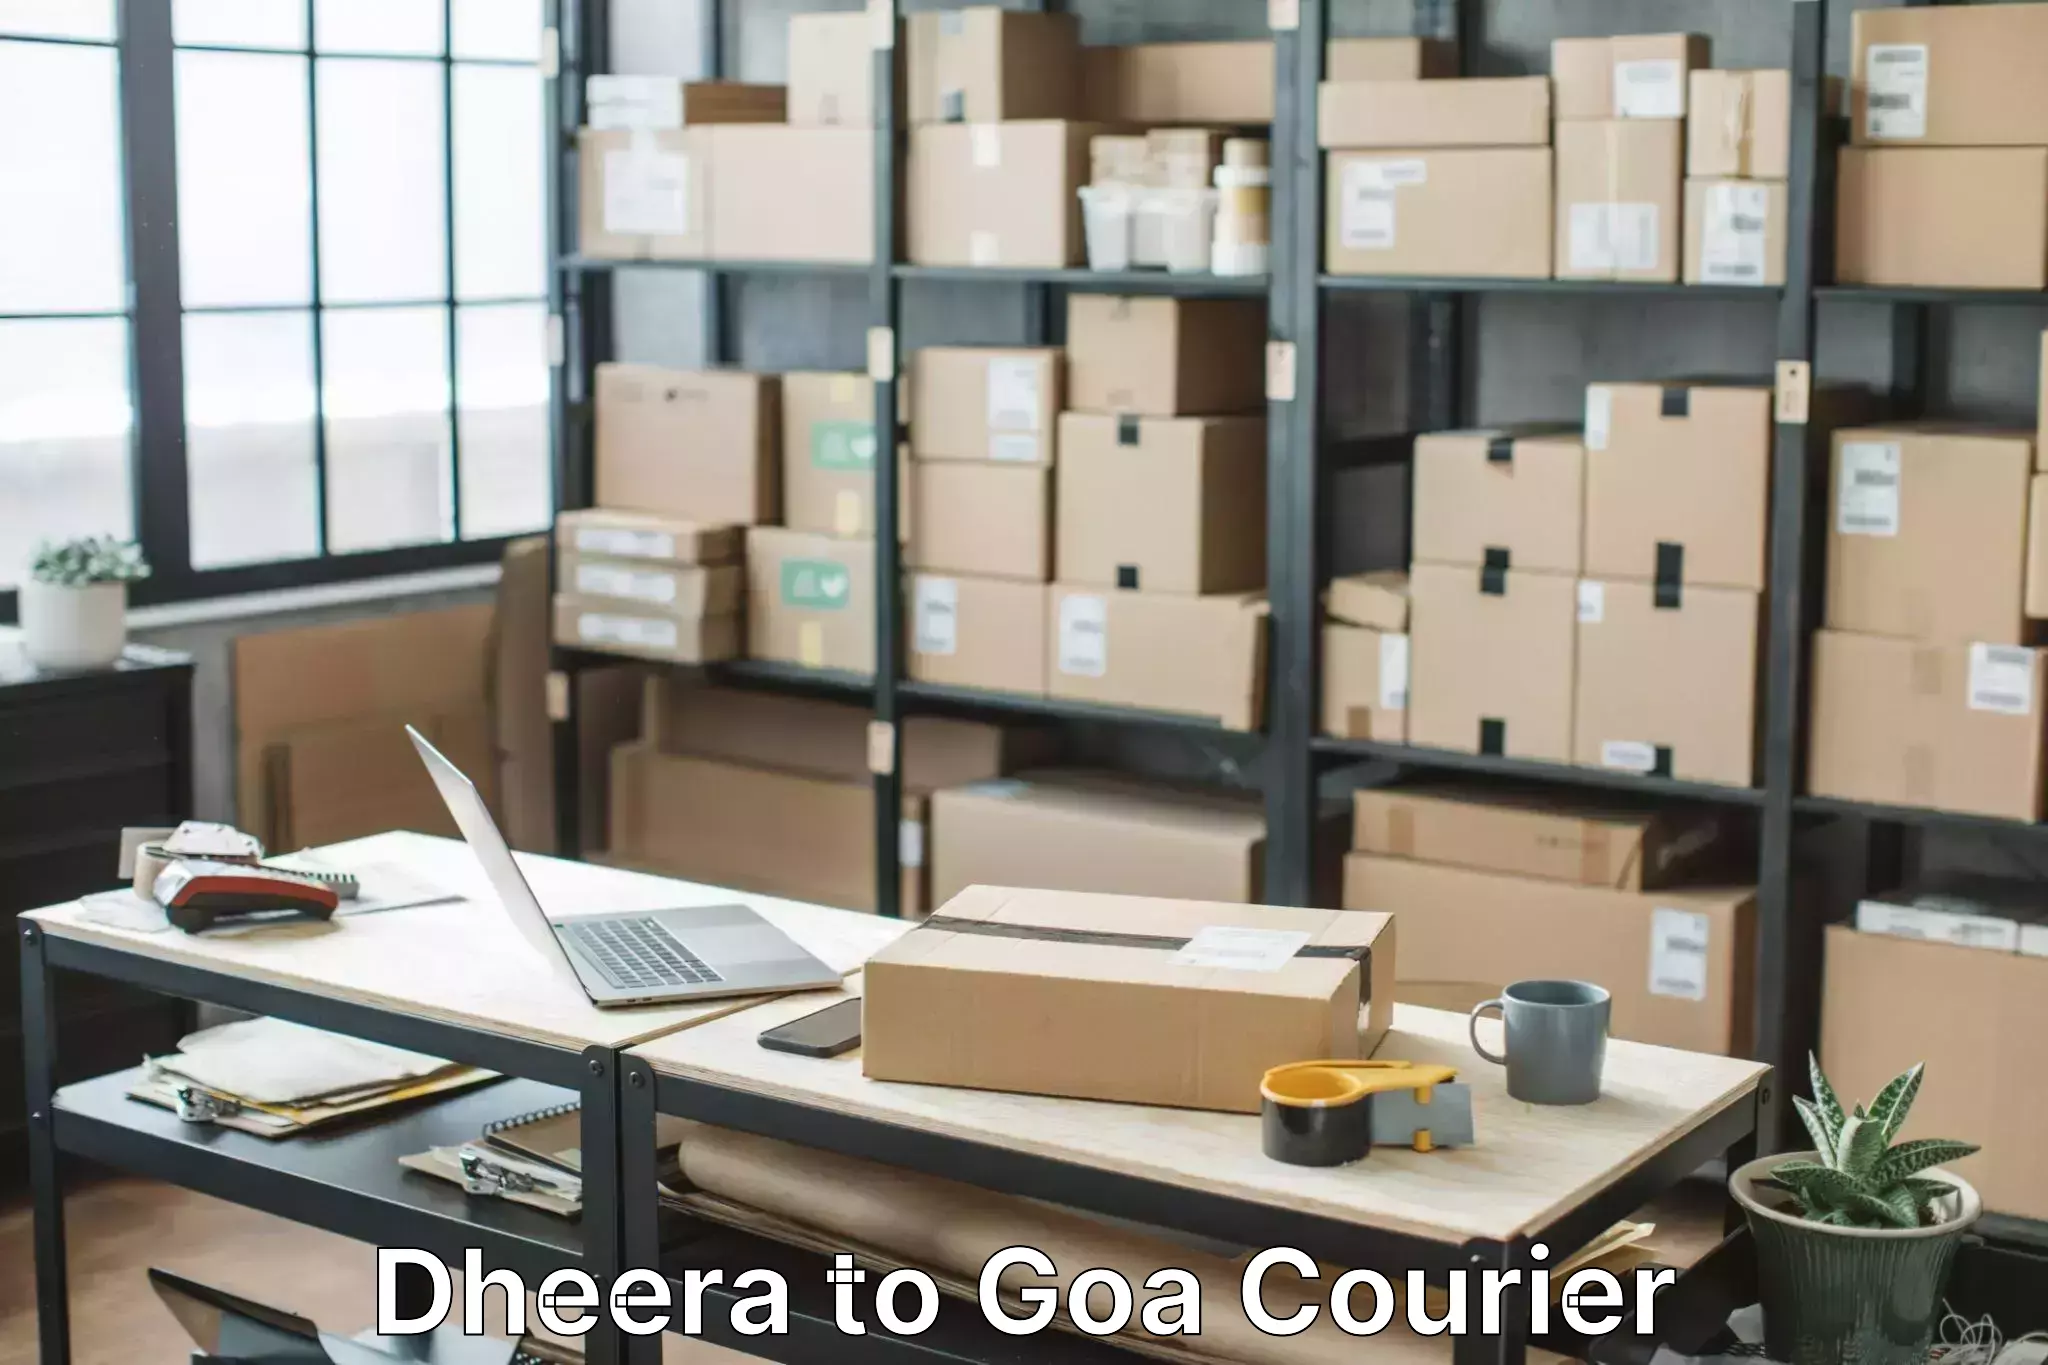 Household transport experts Dheera to Goa